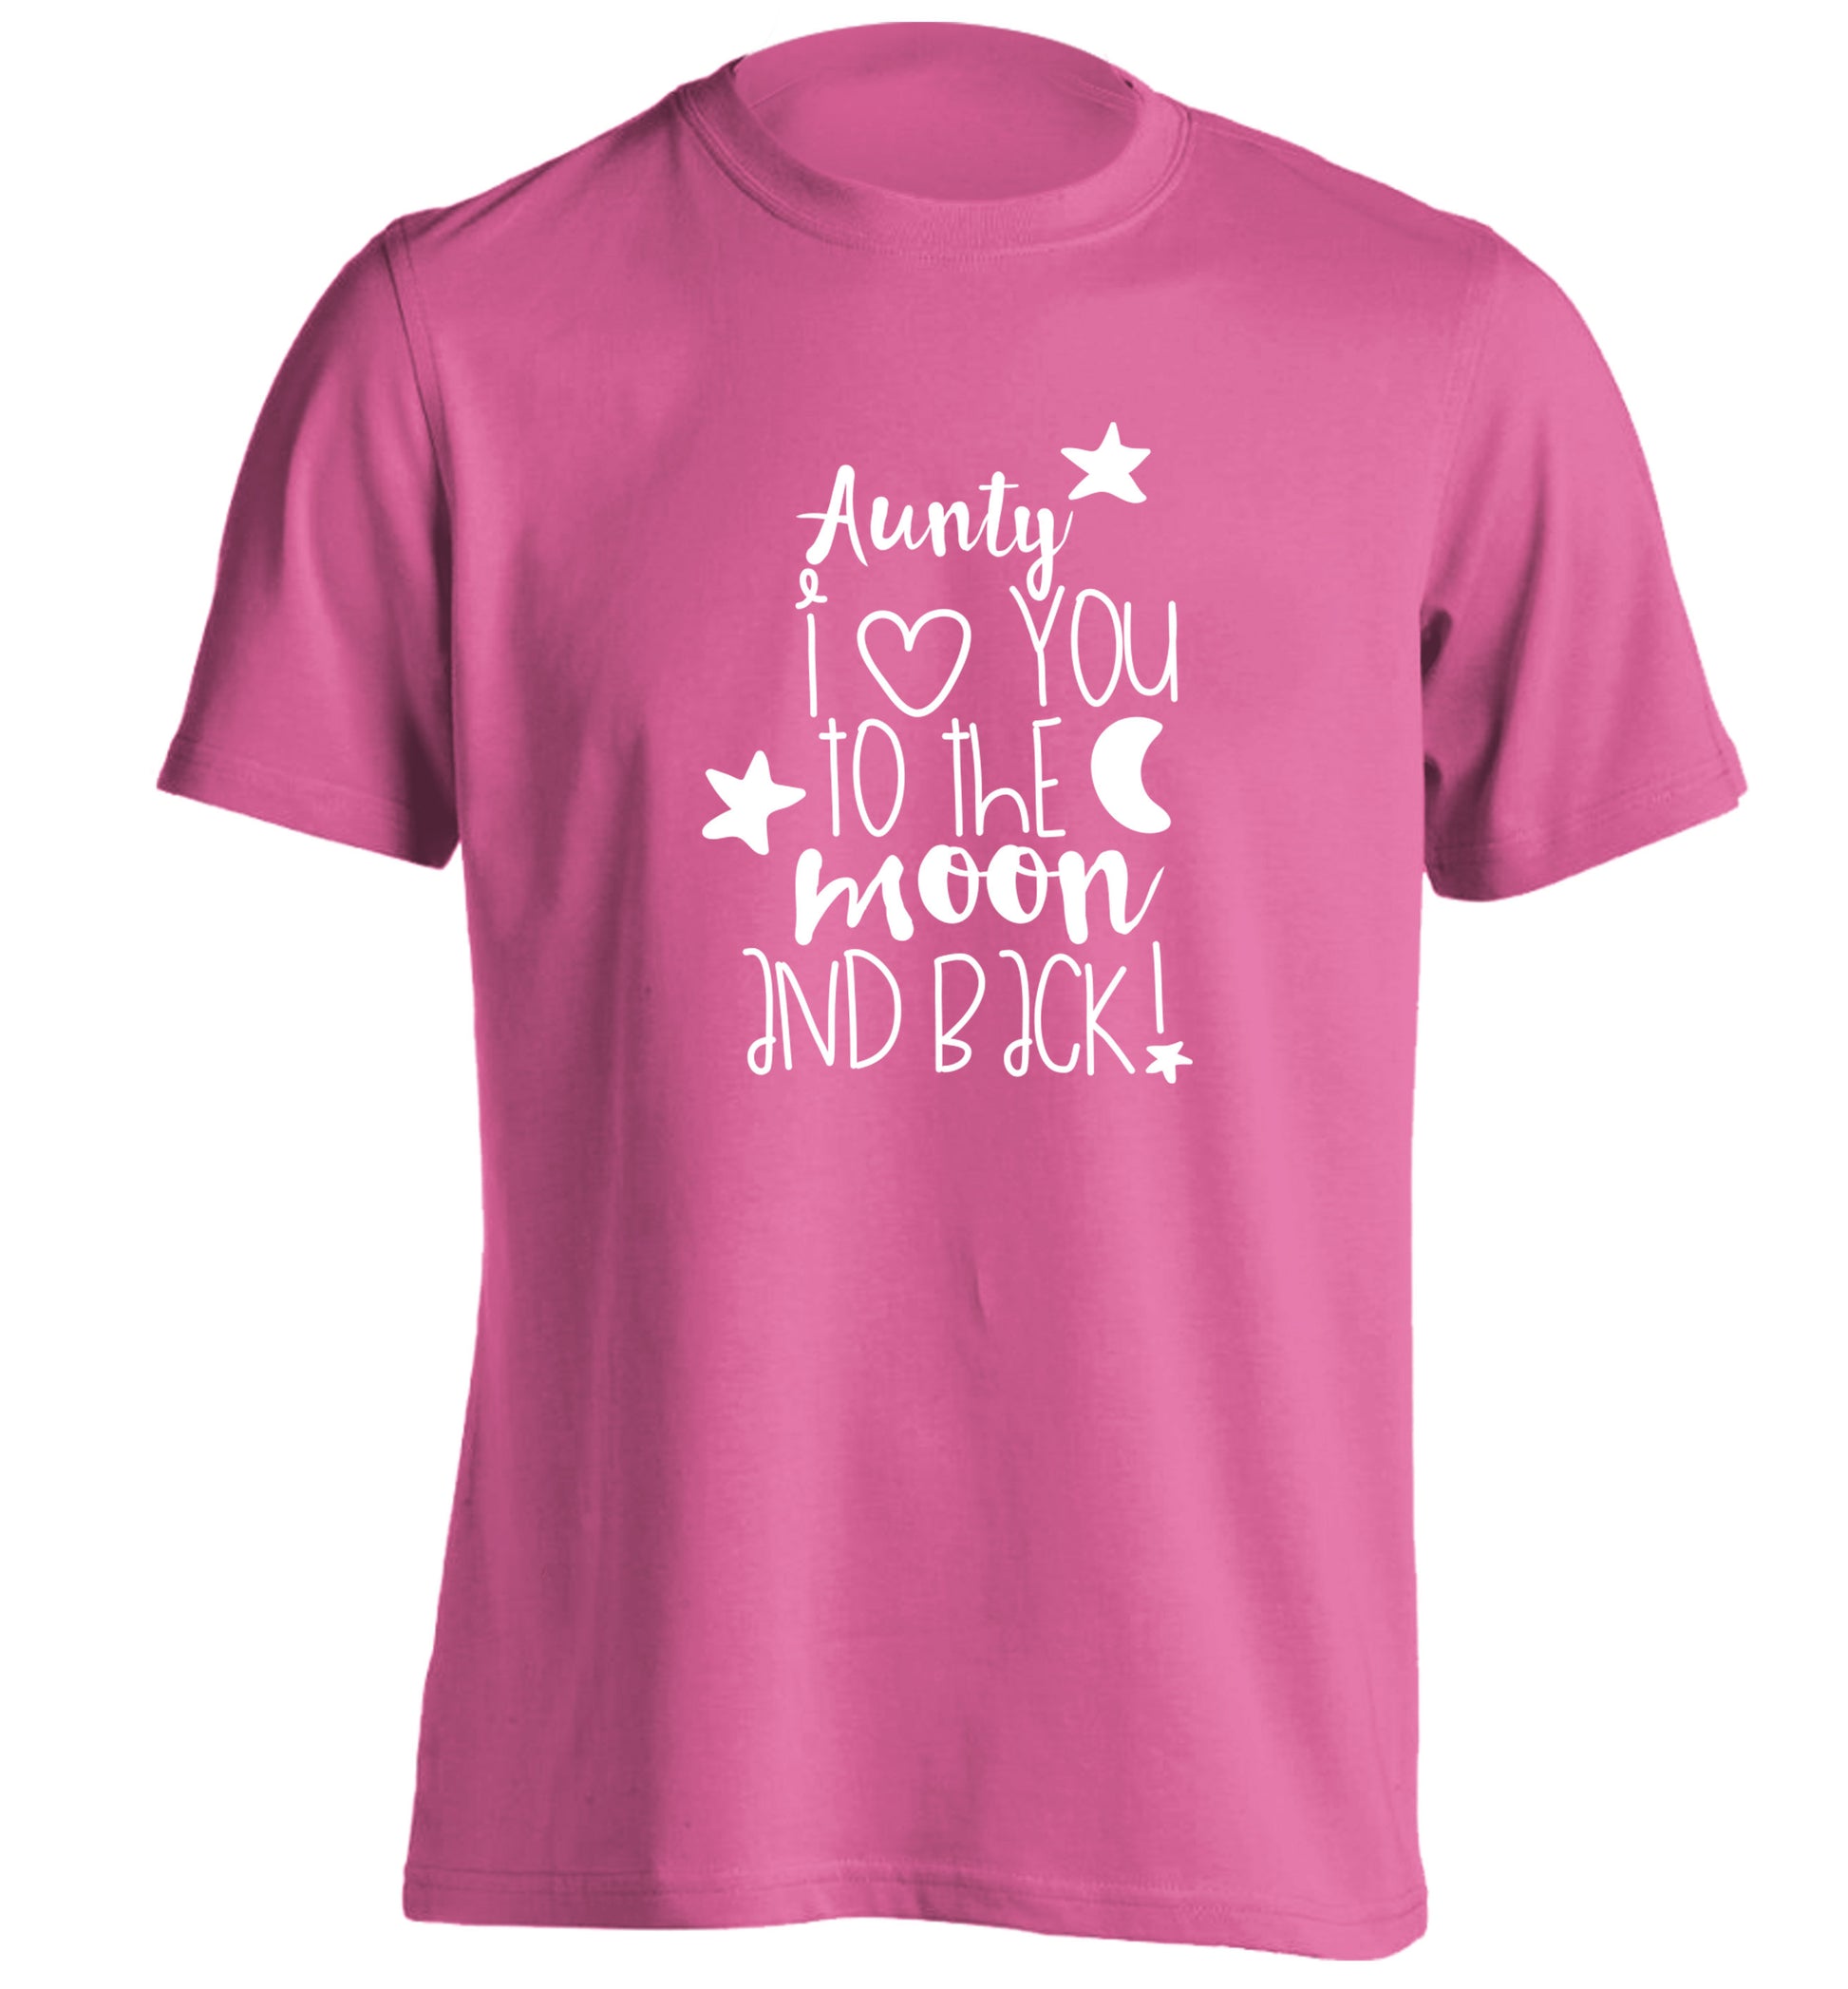 Aunty I love you to the moon and back adults unisex pink Tshirt 2XL